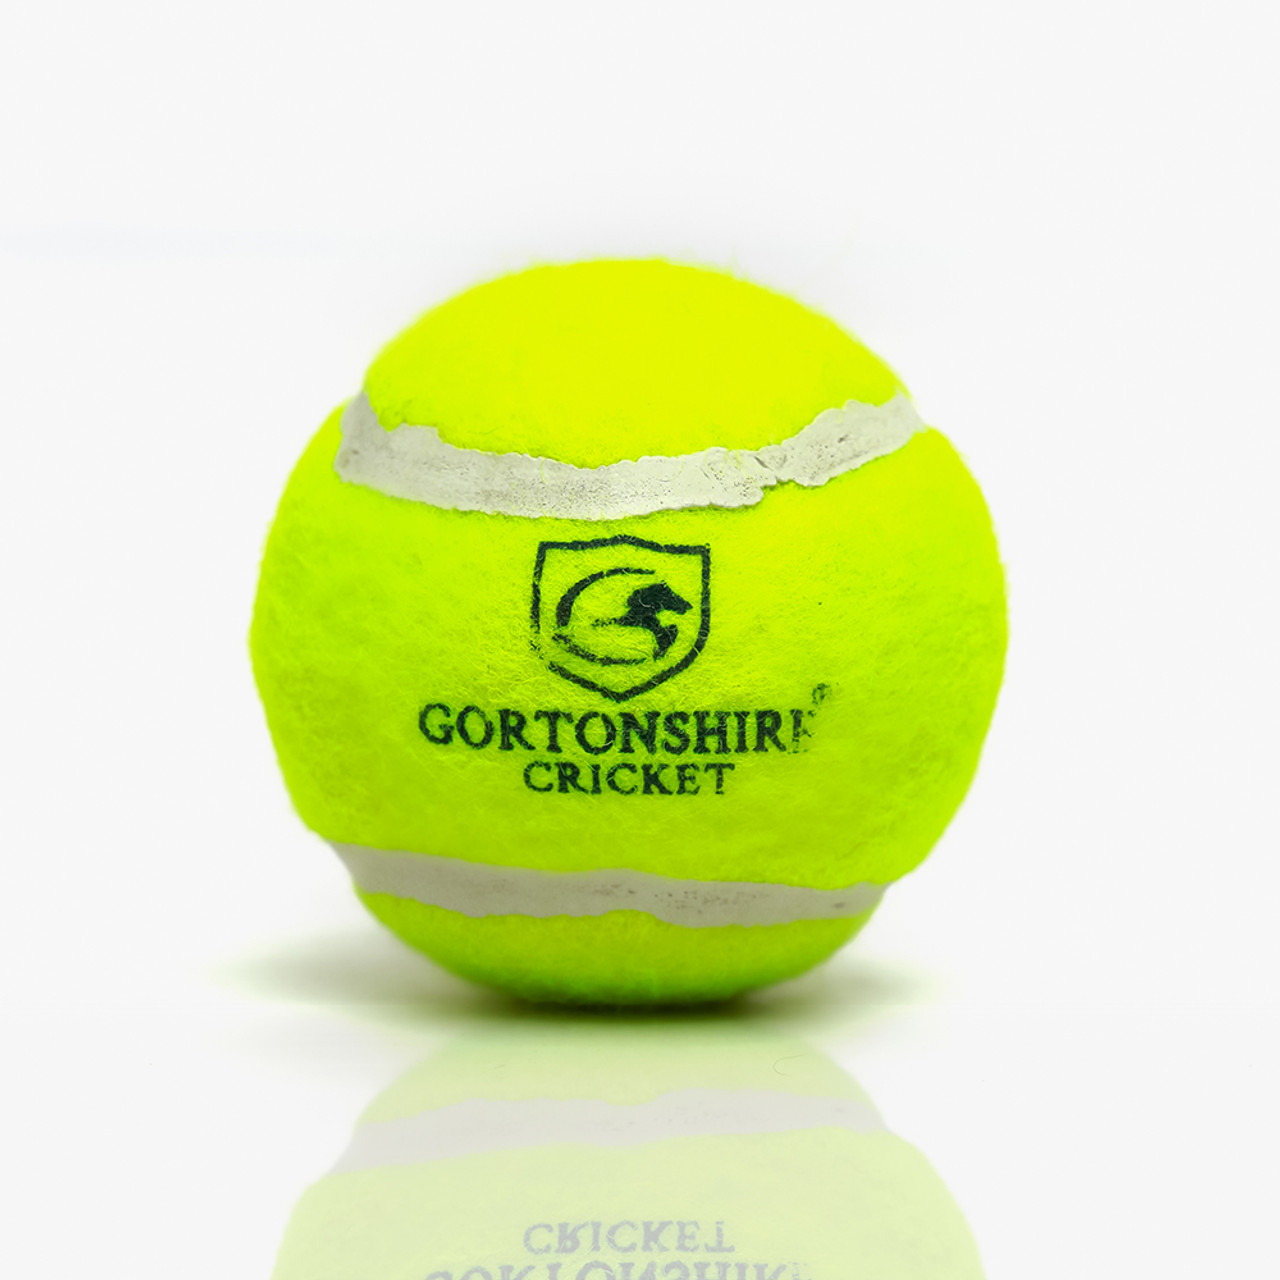 Gortonshire Cricket Tennis Ball Green Heavy Buy Online India Price, Photos and Features Cricket Shop India